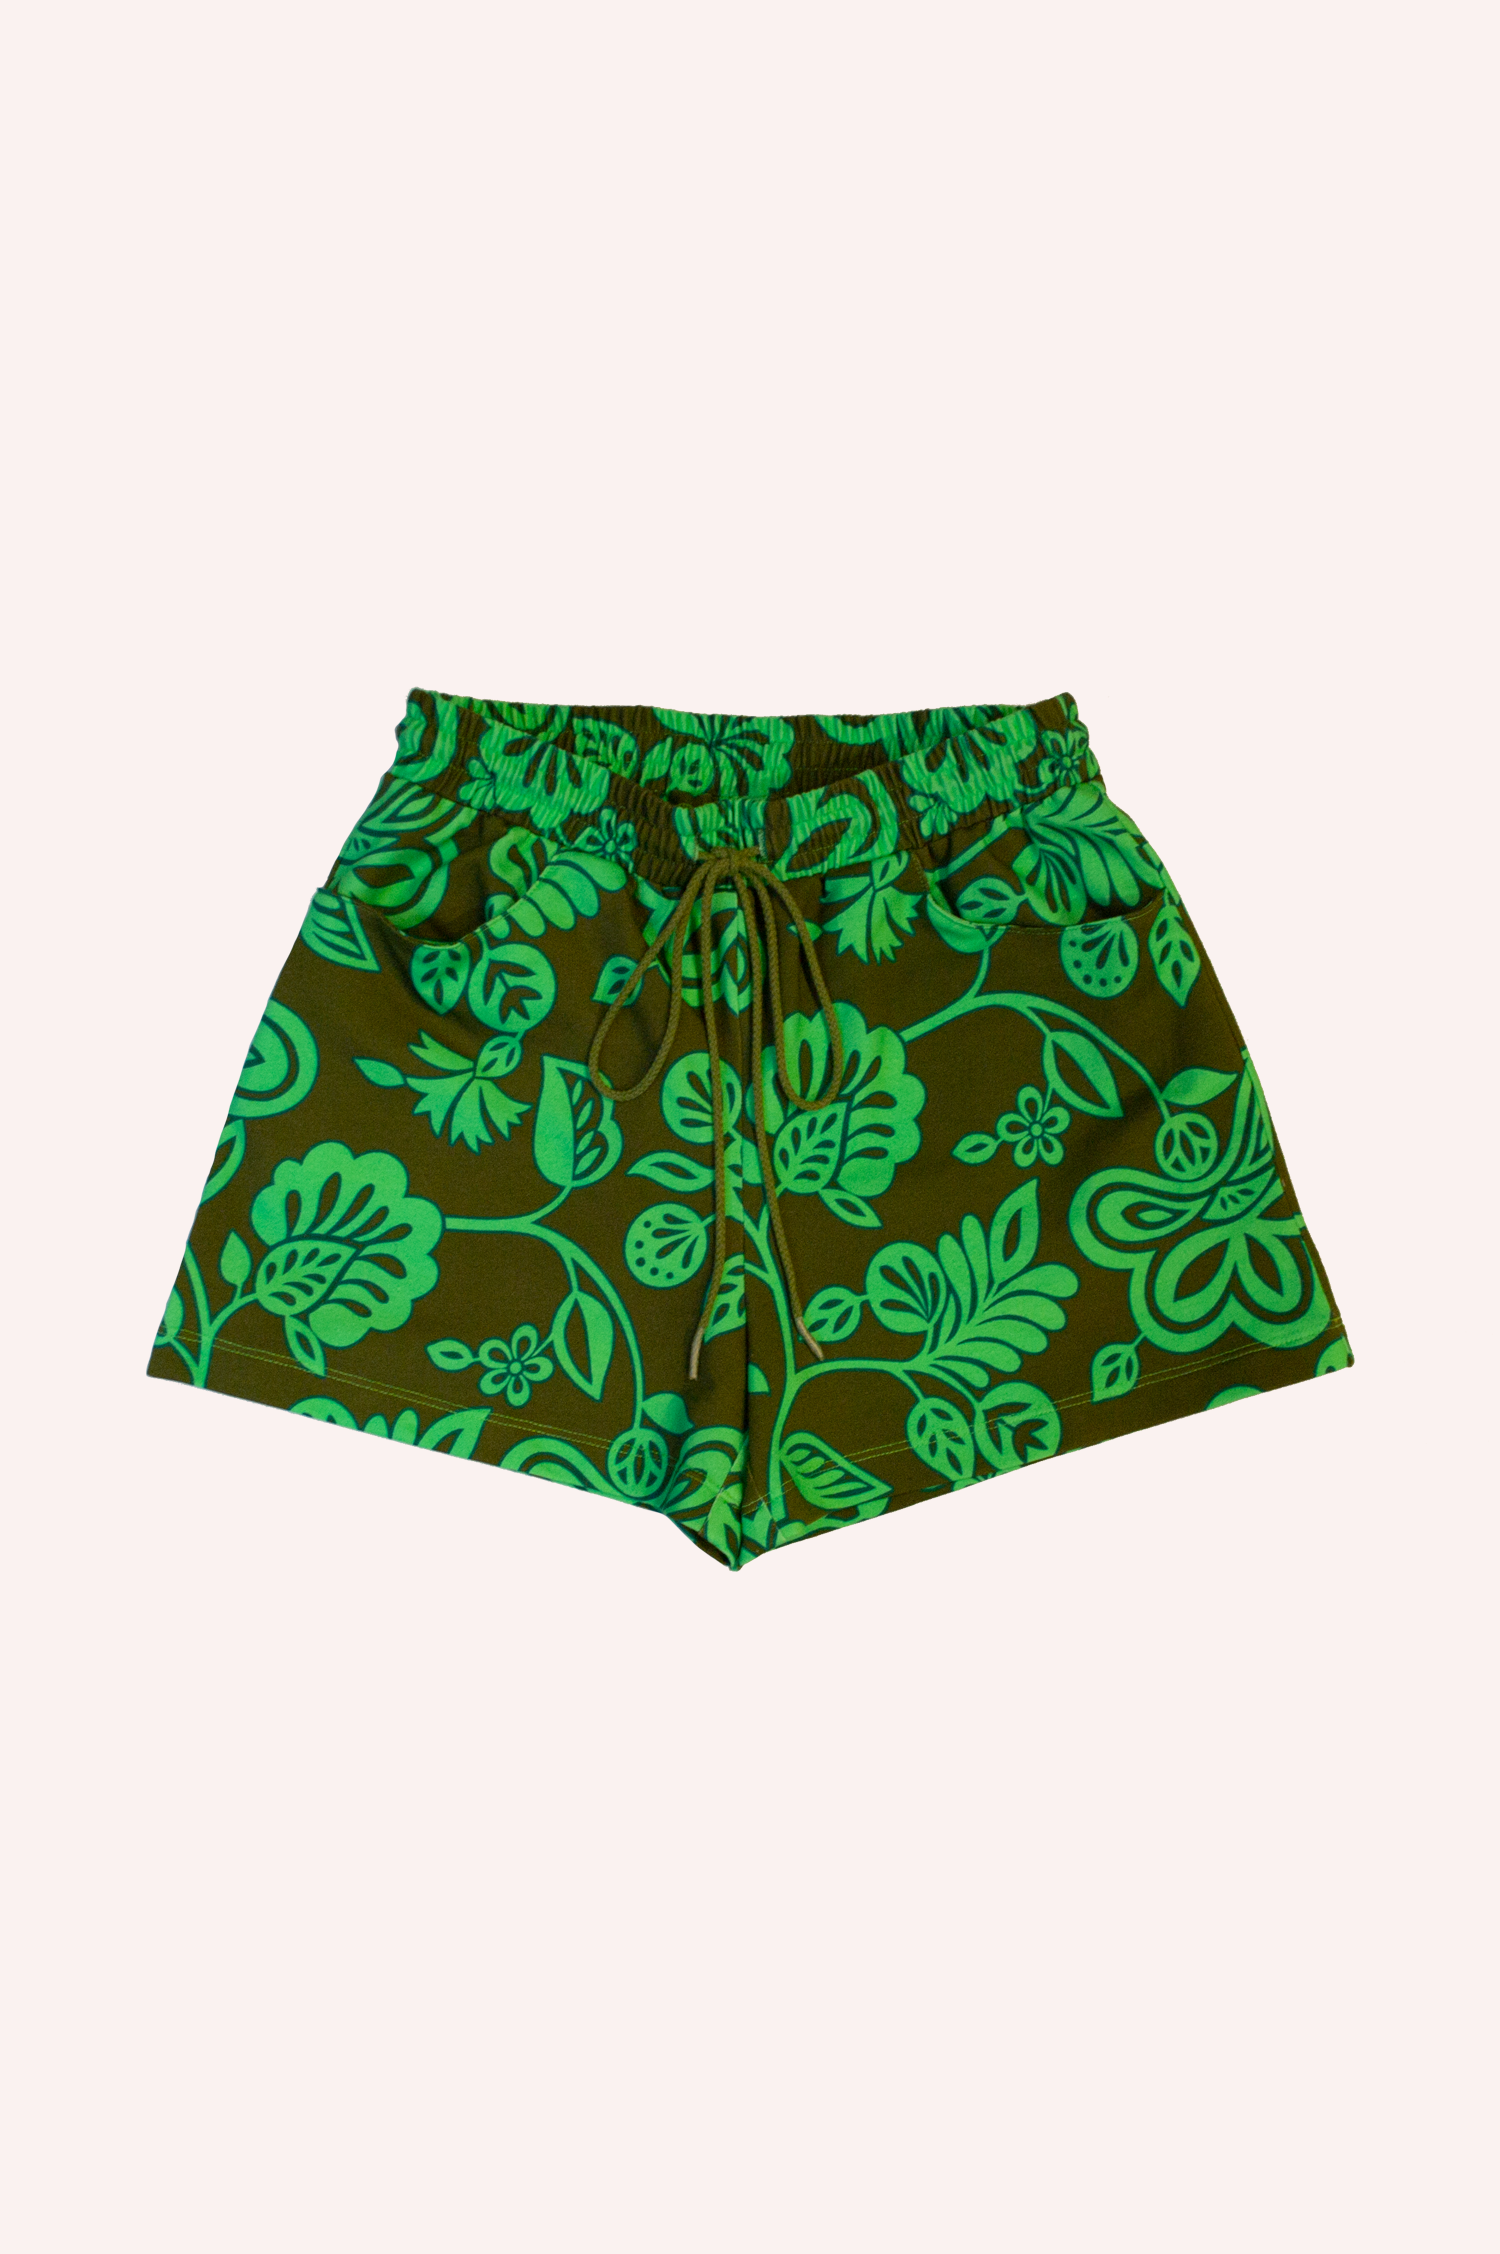 Tropical Havana Shorts, green floral design on a darker green background, lace aa a belt, 2-pocket with an angle